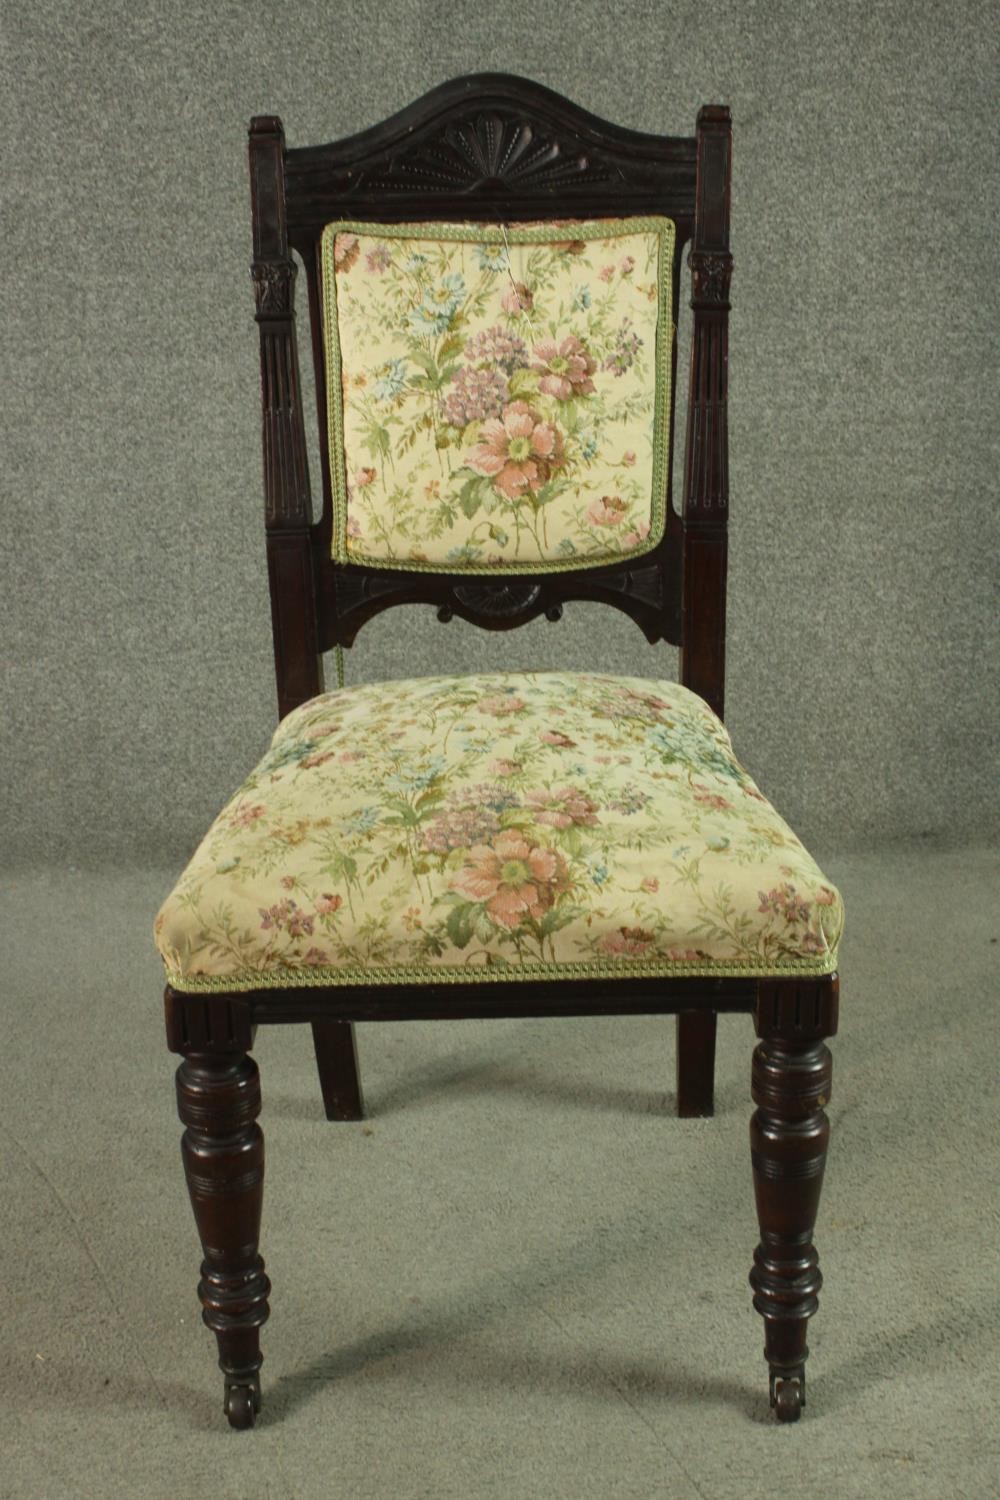 A set of six late 19th century dining chairs including two carvers and four side chairs, with a - Image 2 of 12